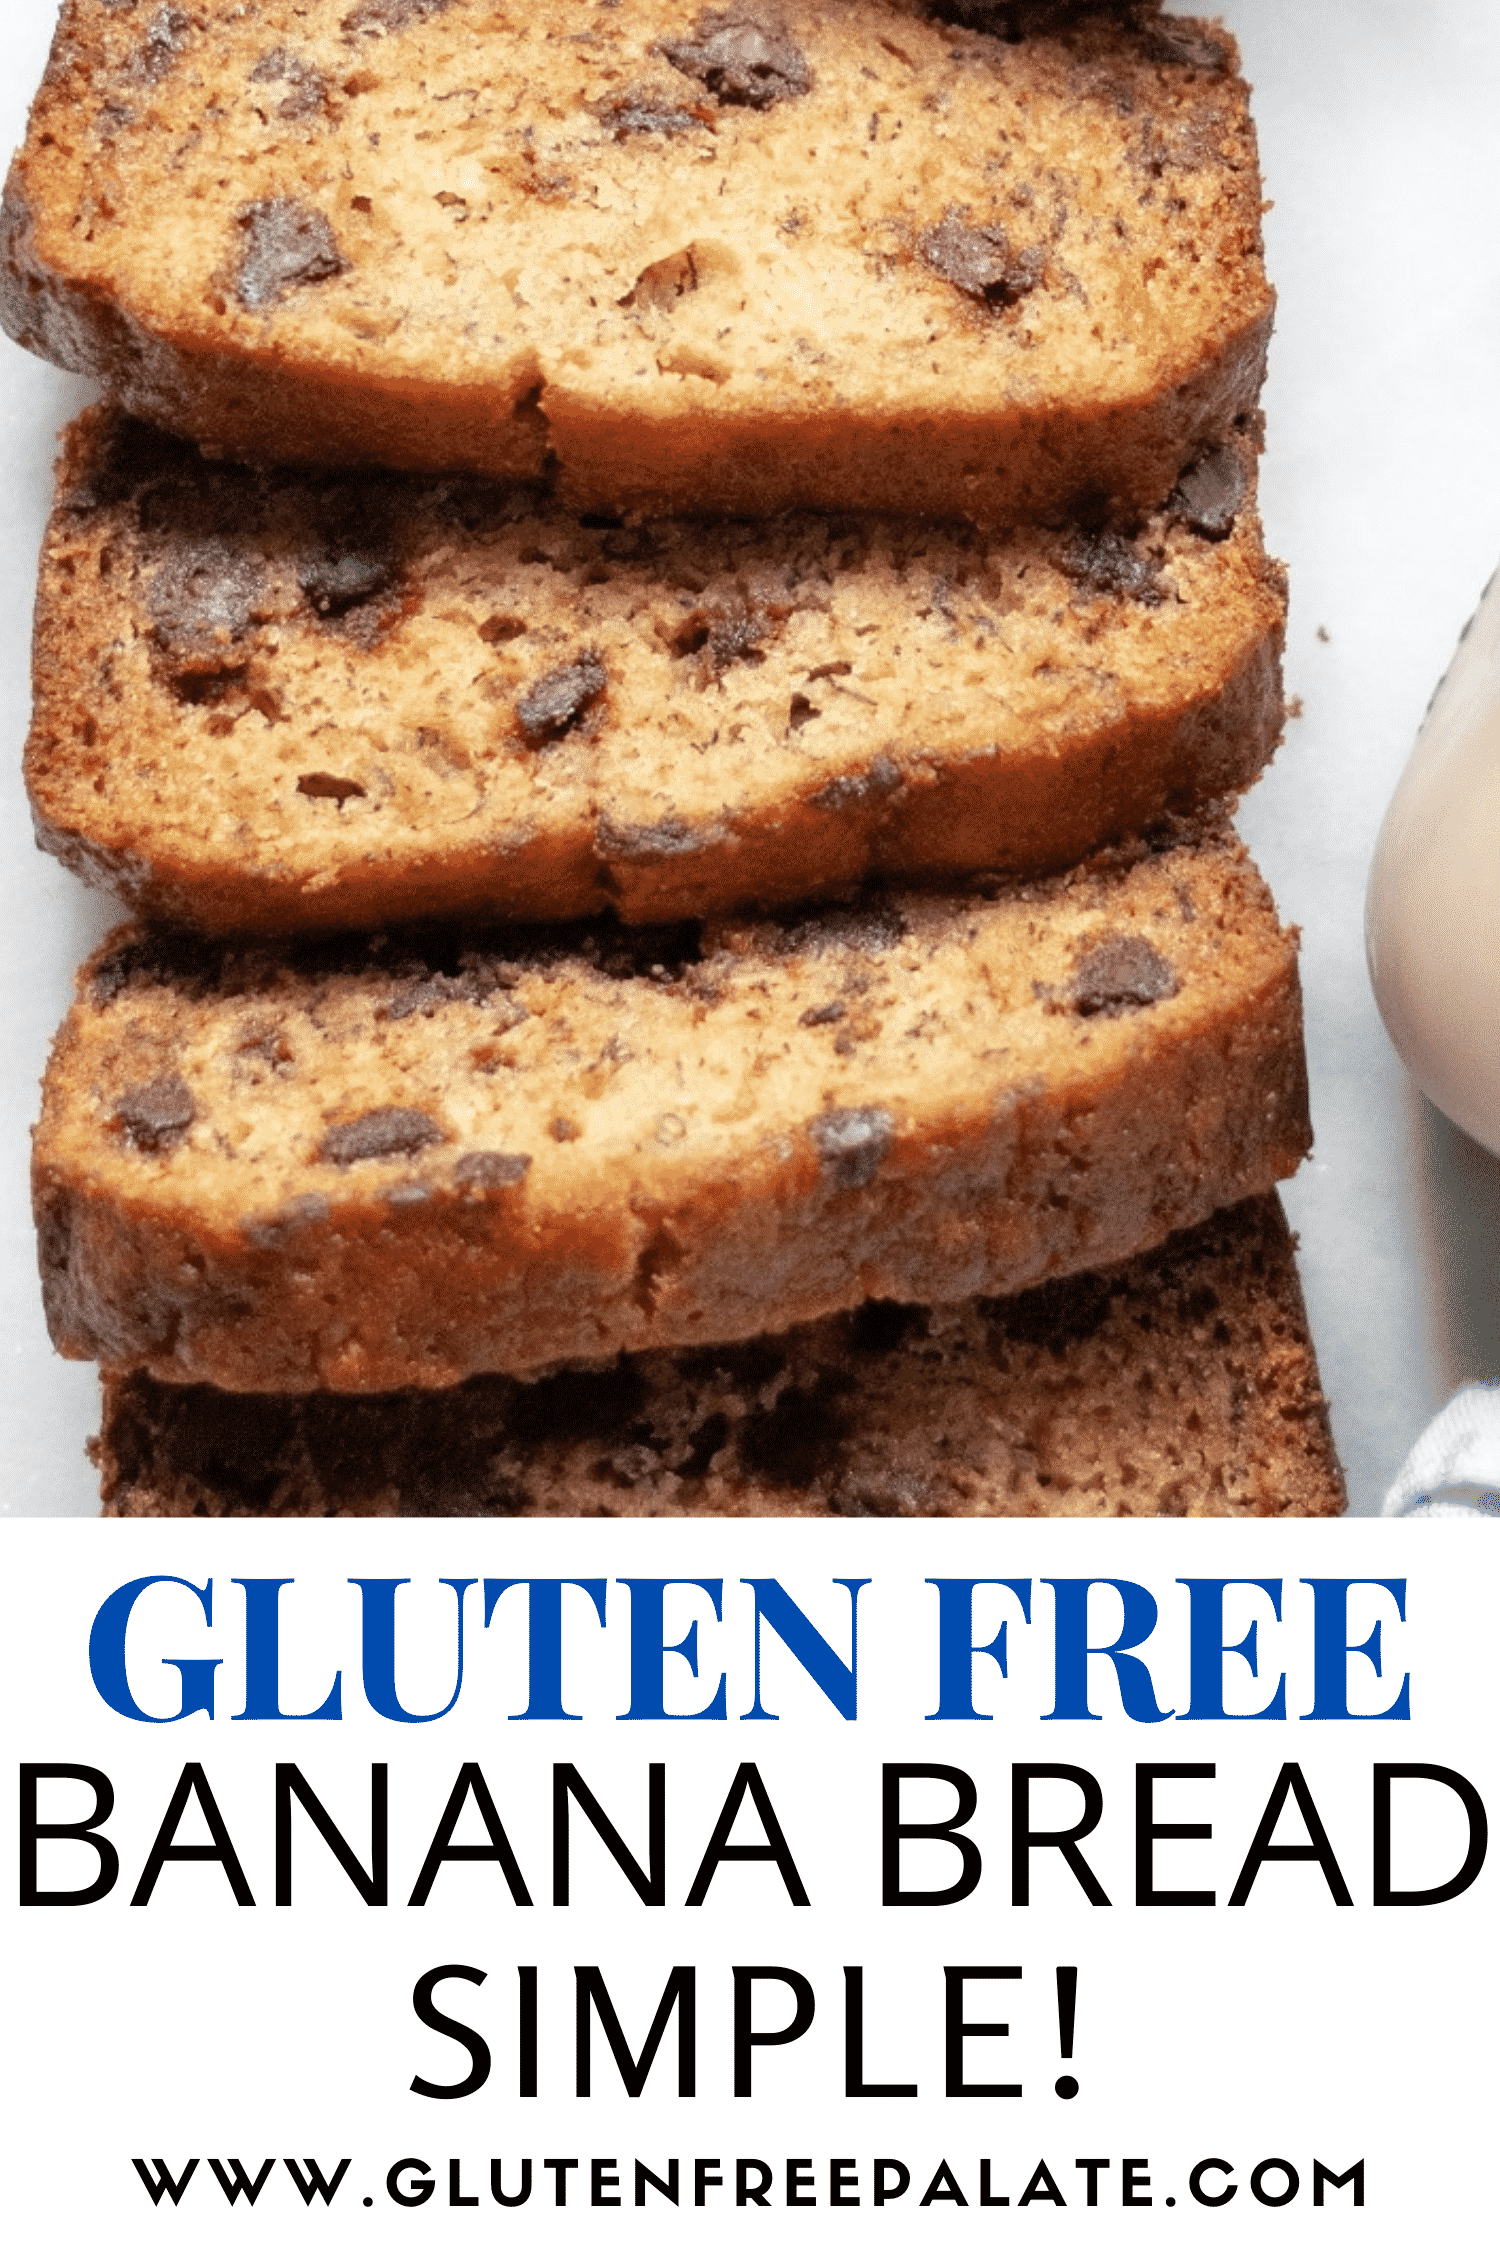 slices of gluten-free banana bread with chocolate chips, with text overlay